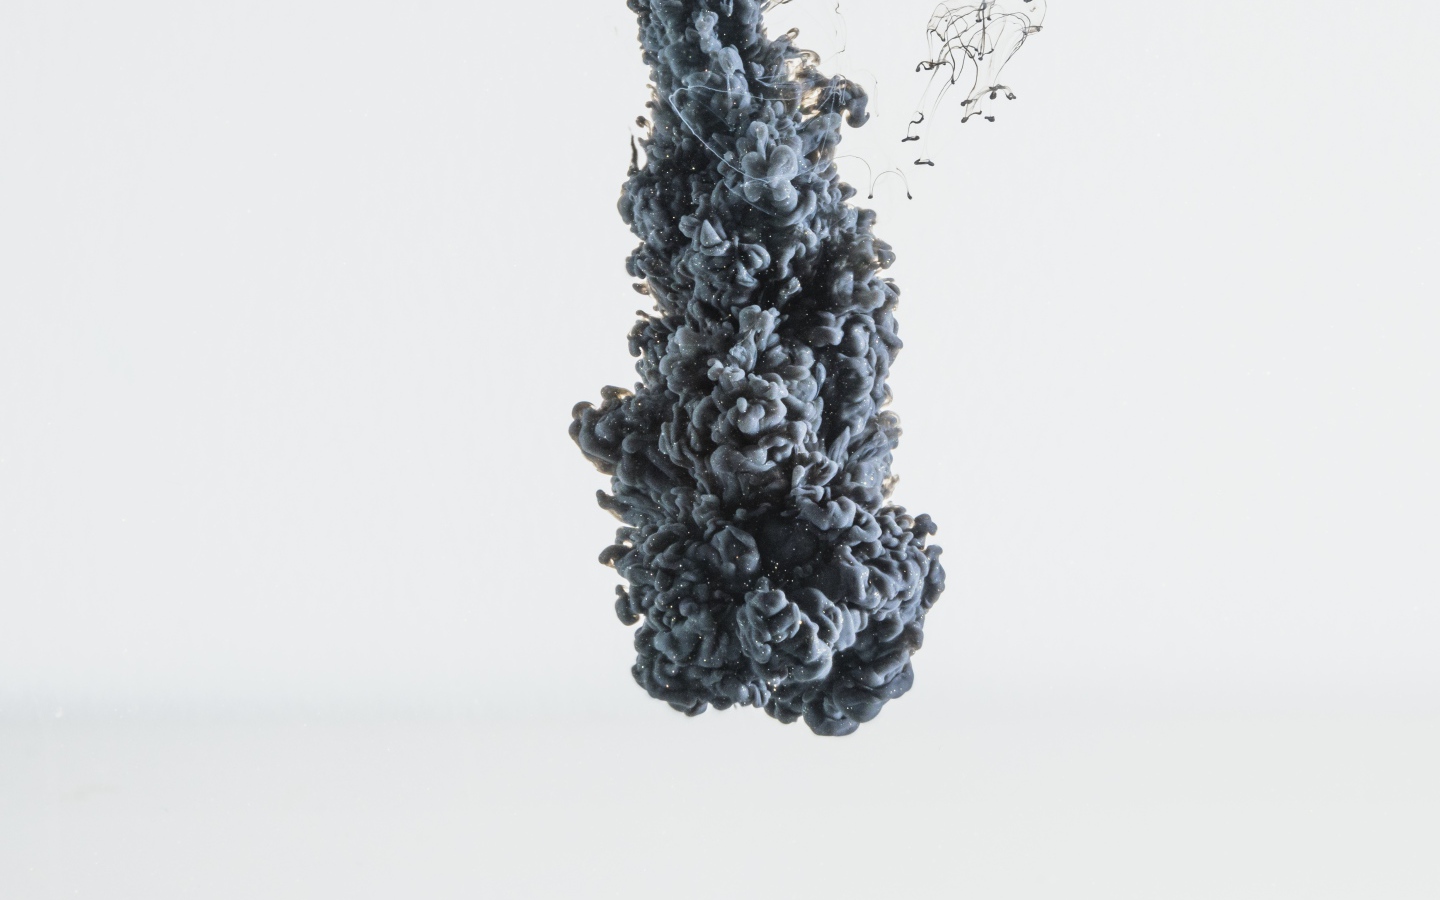 Black paint dissolves in water on a white background